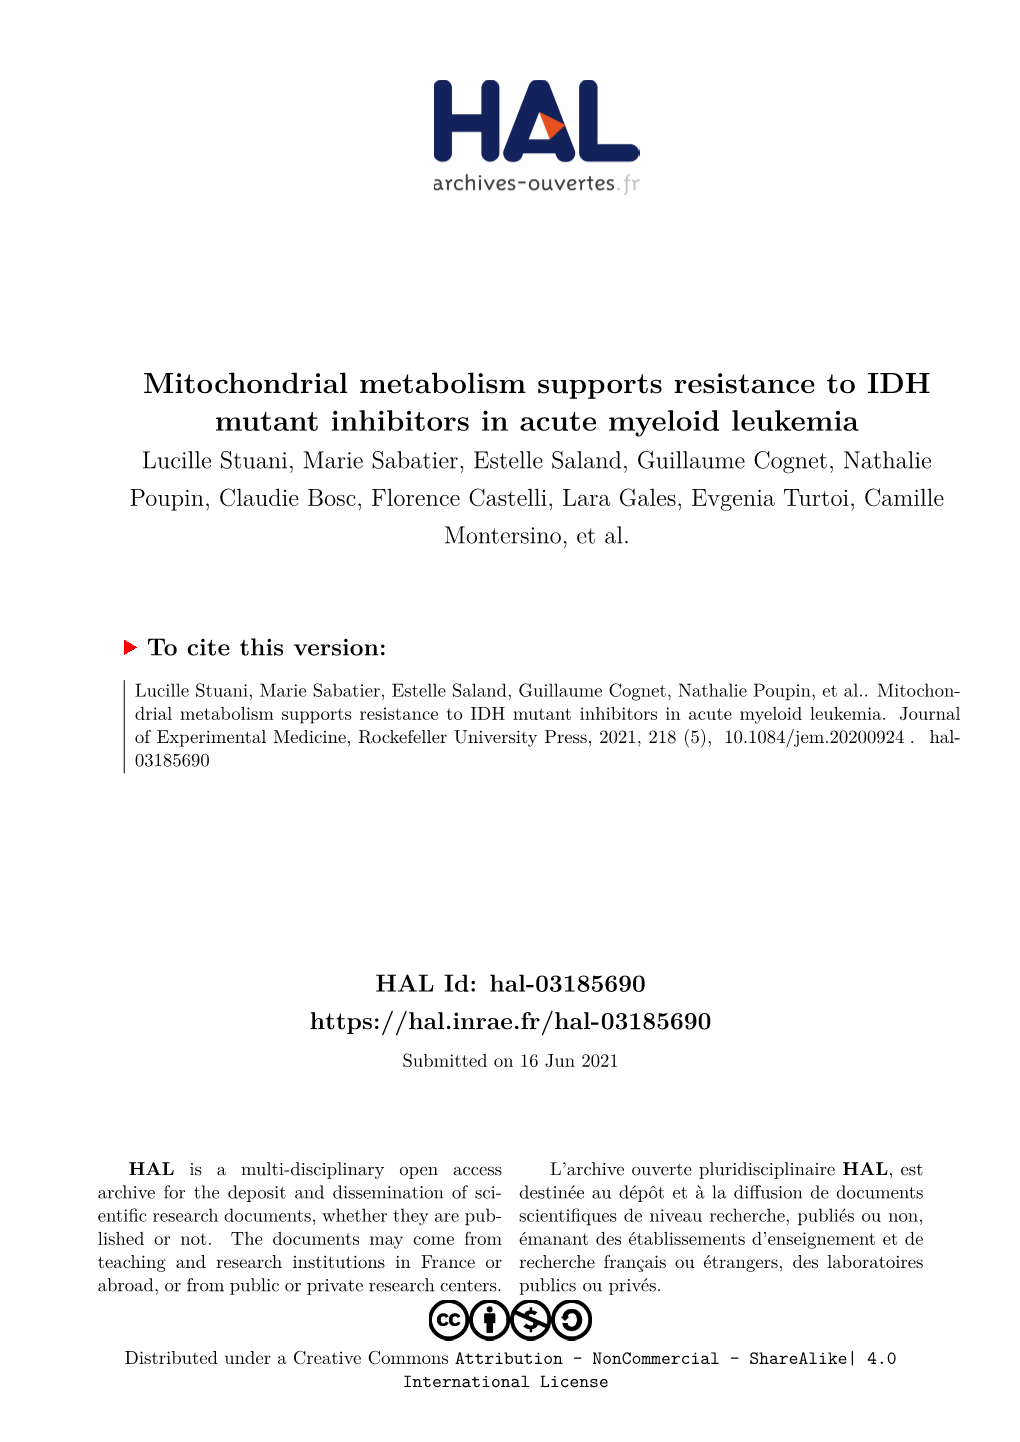 Mitochondrial Metabolism Supports Resistance to IDH Mutant Inhibitors